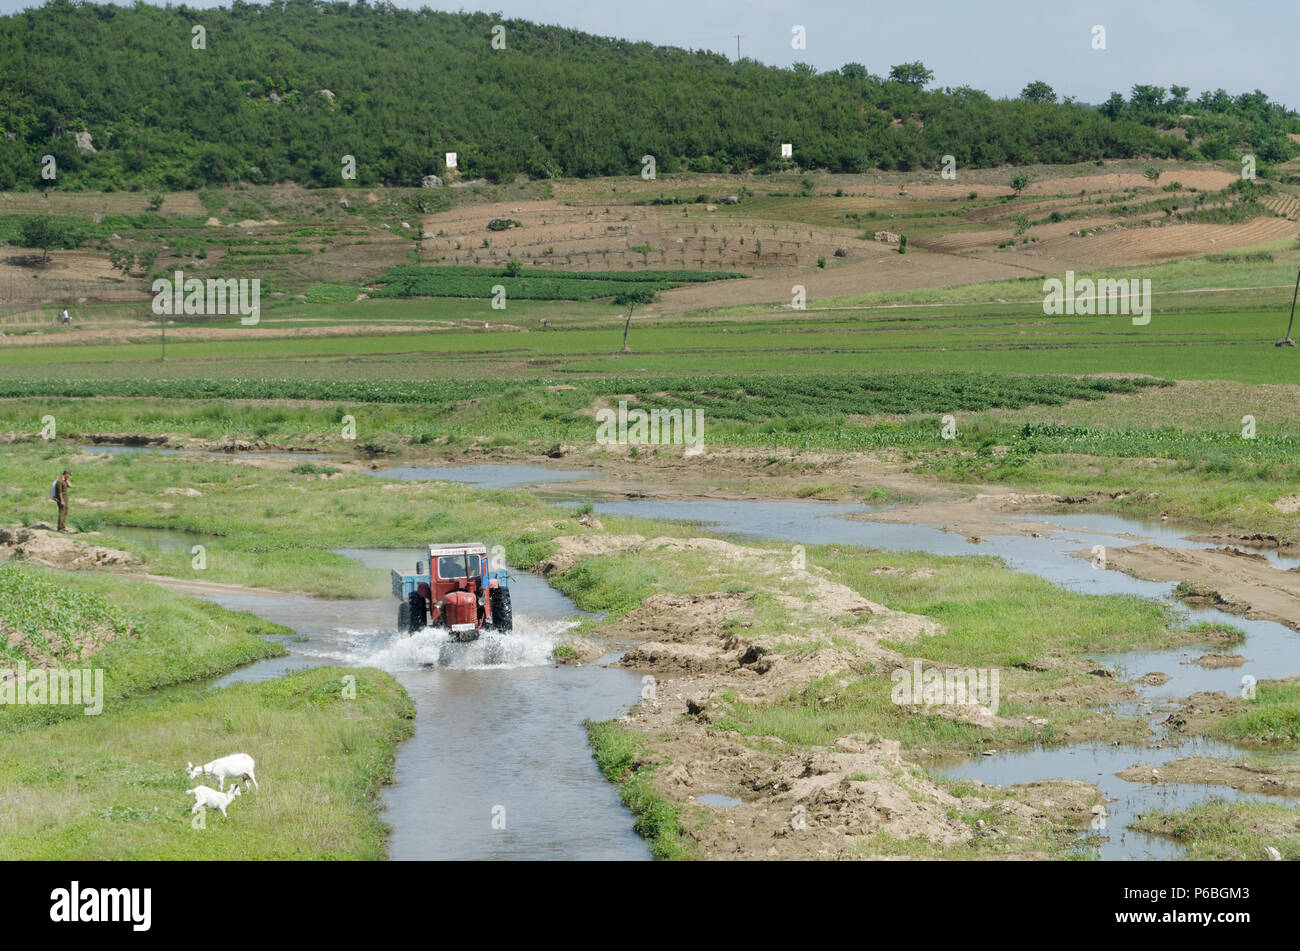 Tractor driving through an irrigation channel, pulling a load, raising a wave and splashing front, in North Korea DPRK Stock Photo